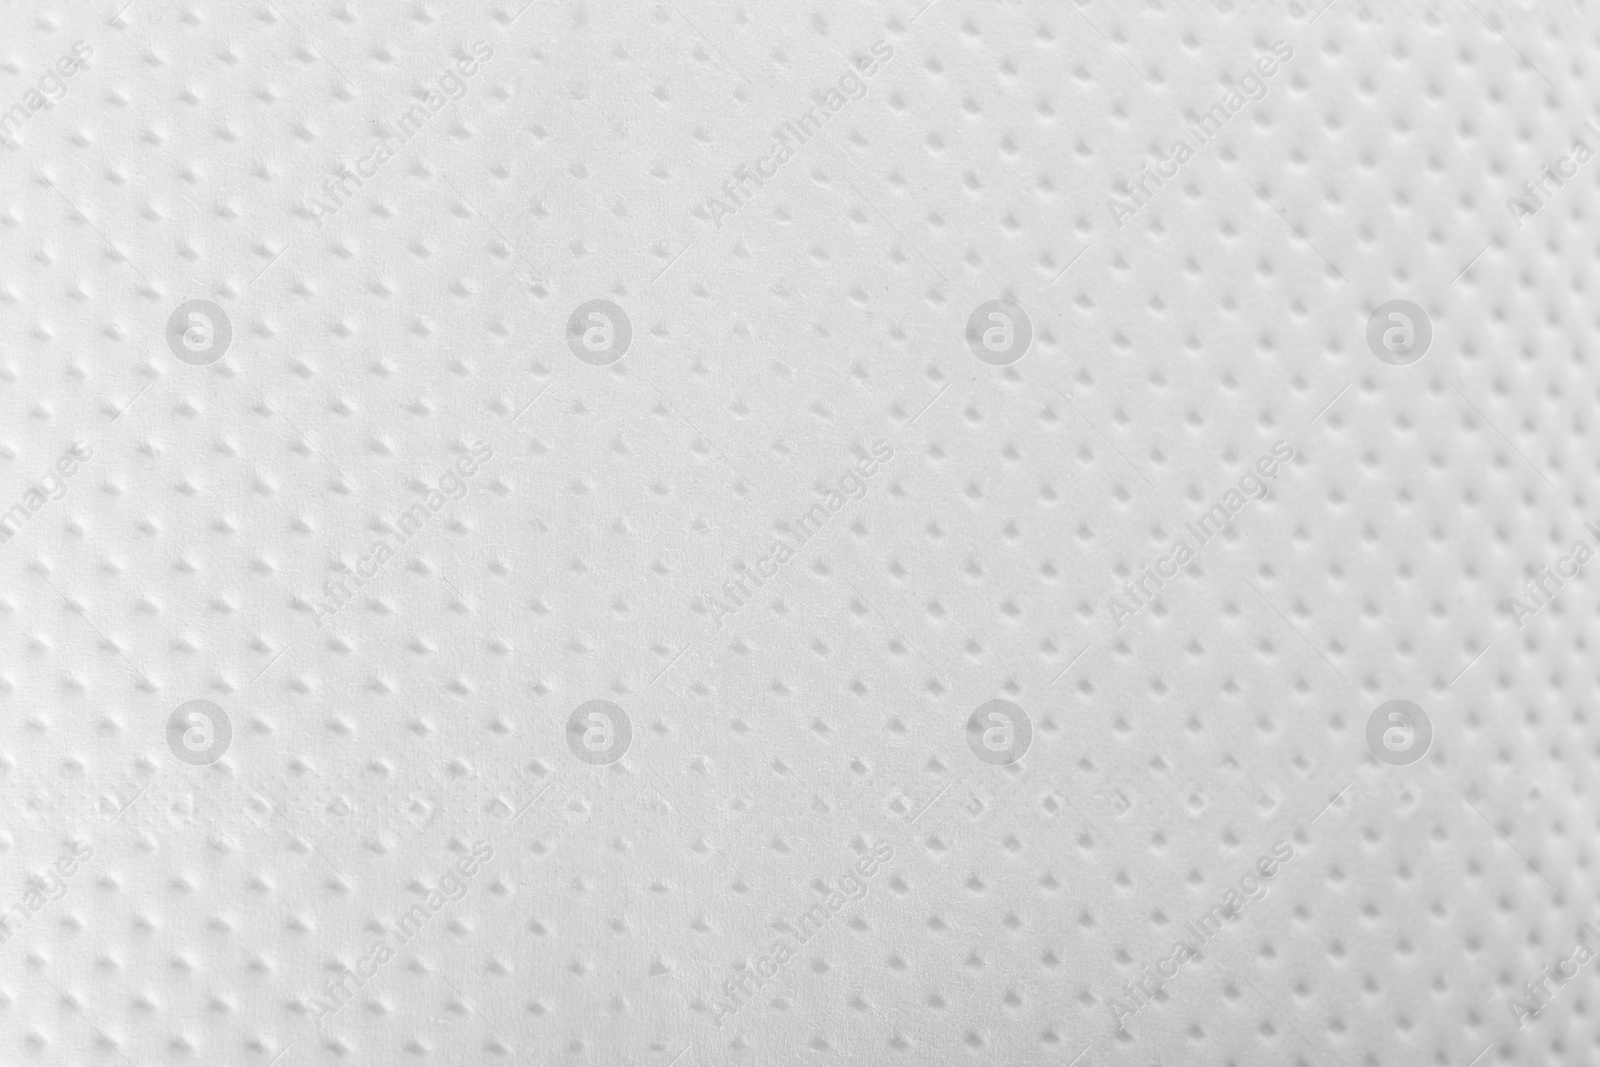 Photo of Perforated toilet paper as background, closeup. Personal hygiene